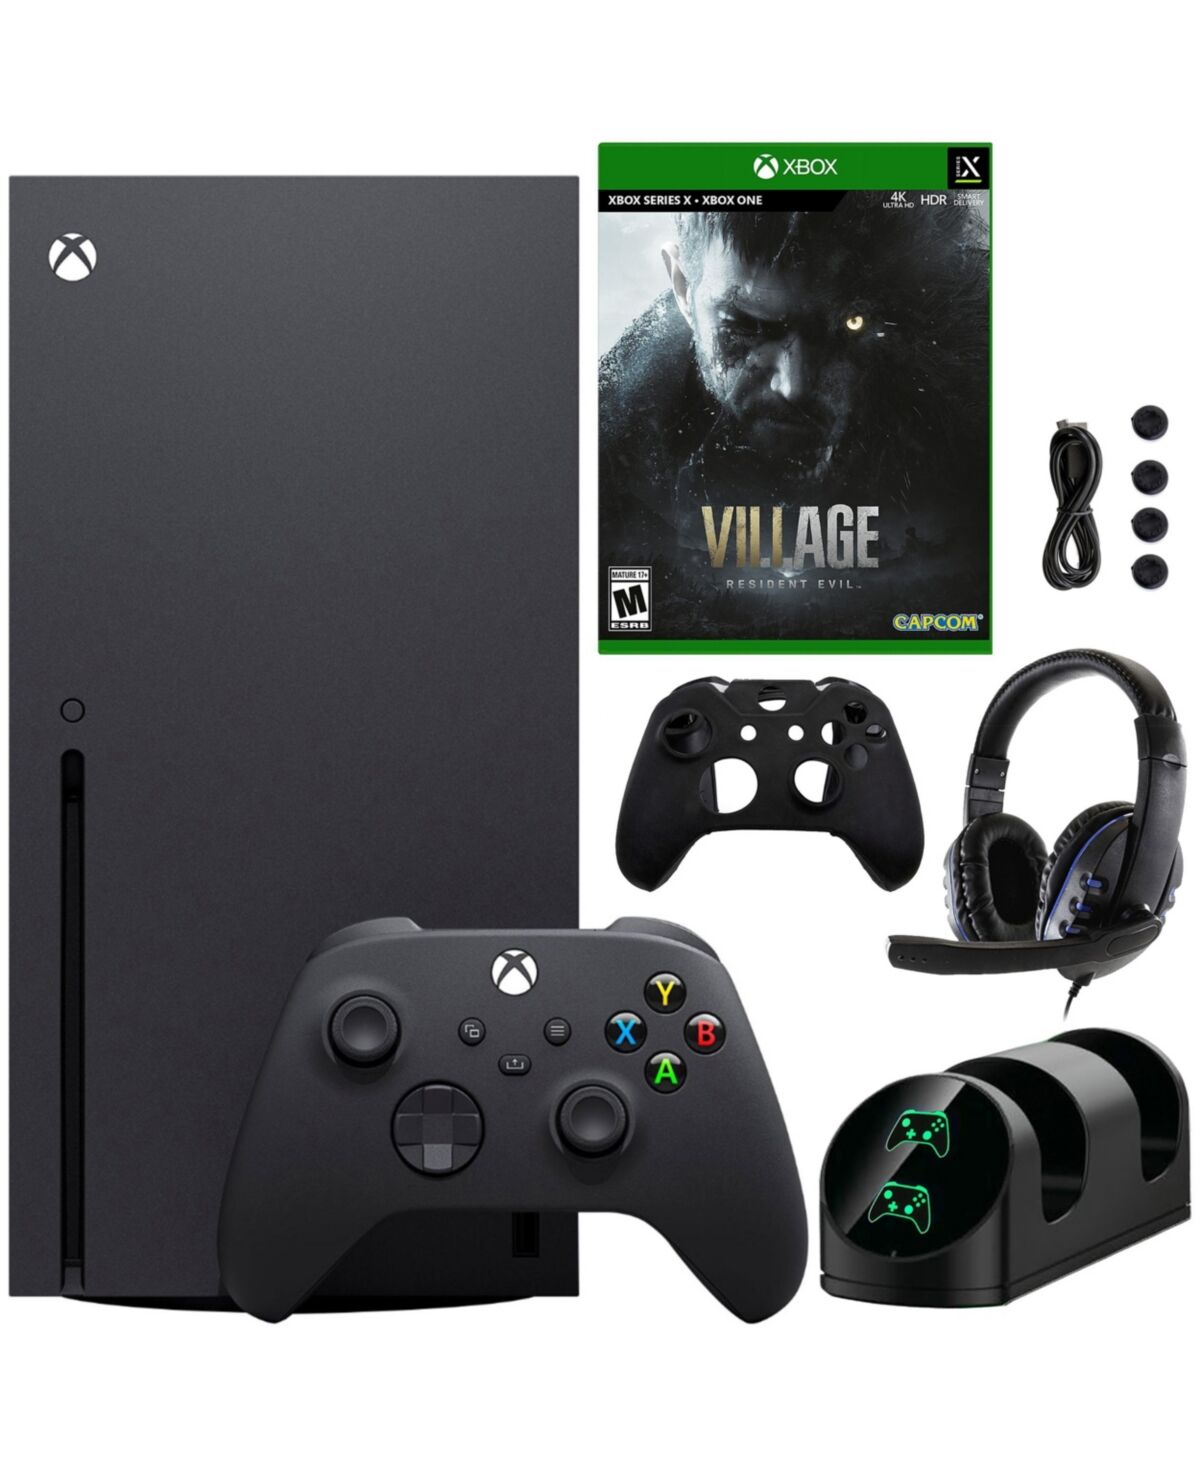 Xbox Series X 1TB Console with Accessories Kit and Resident Evil: Village Game - Black